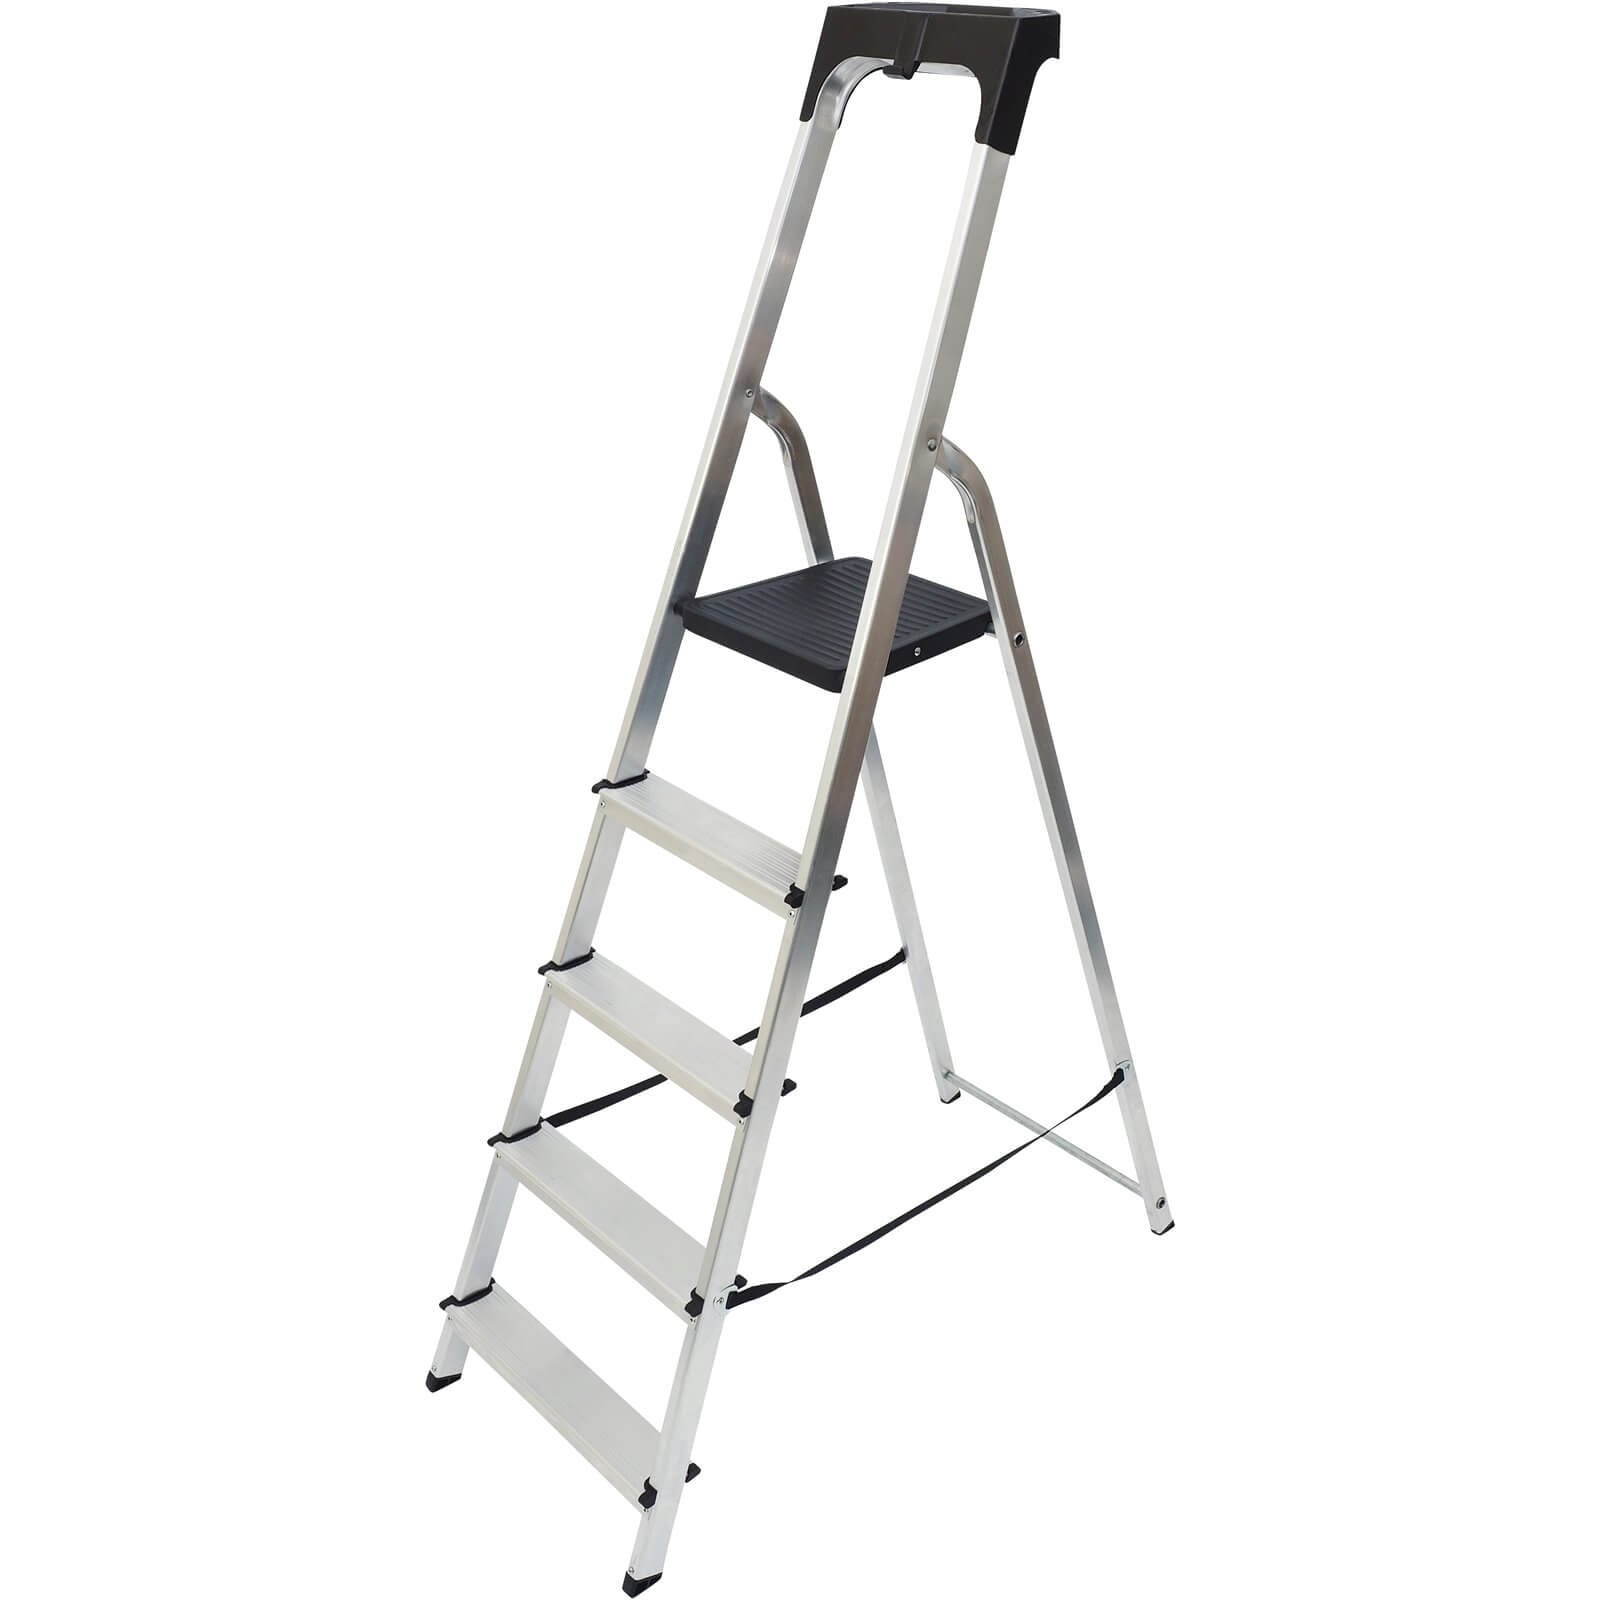 Werner High Handrail Step Ladder with Tool Tray - 5 Tread